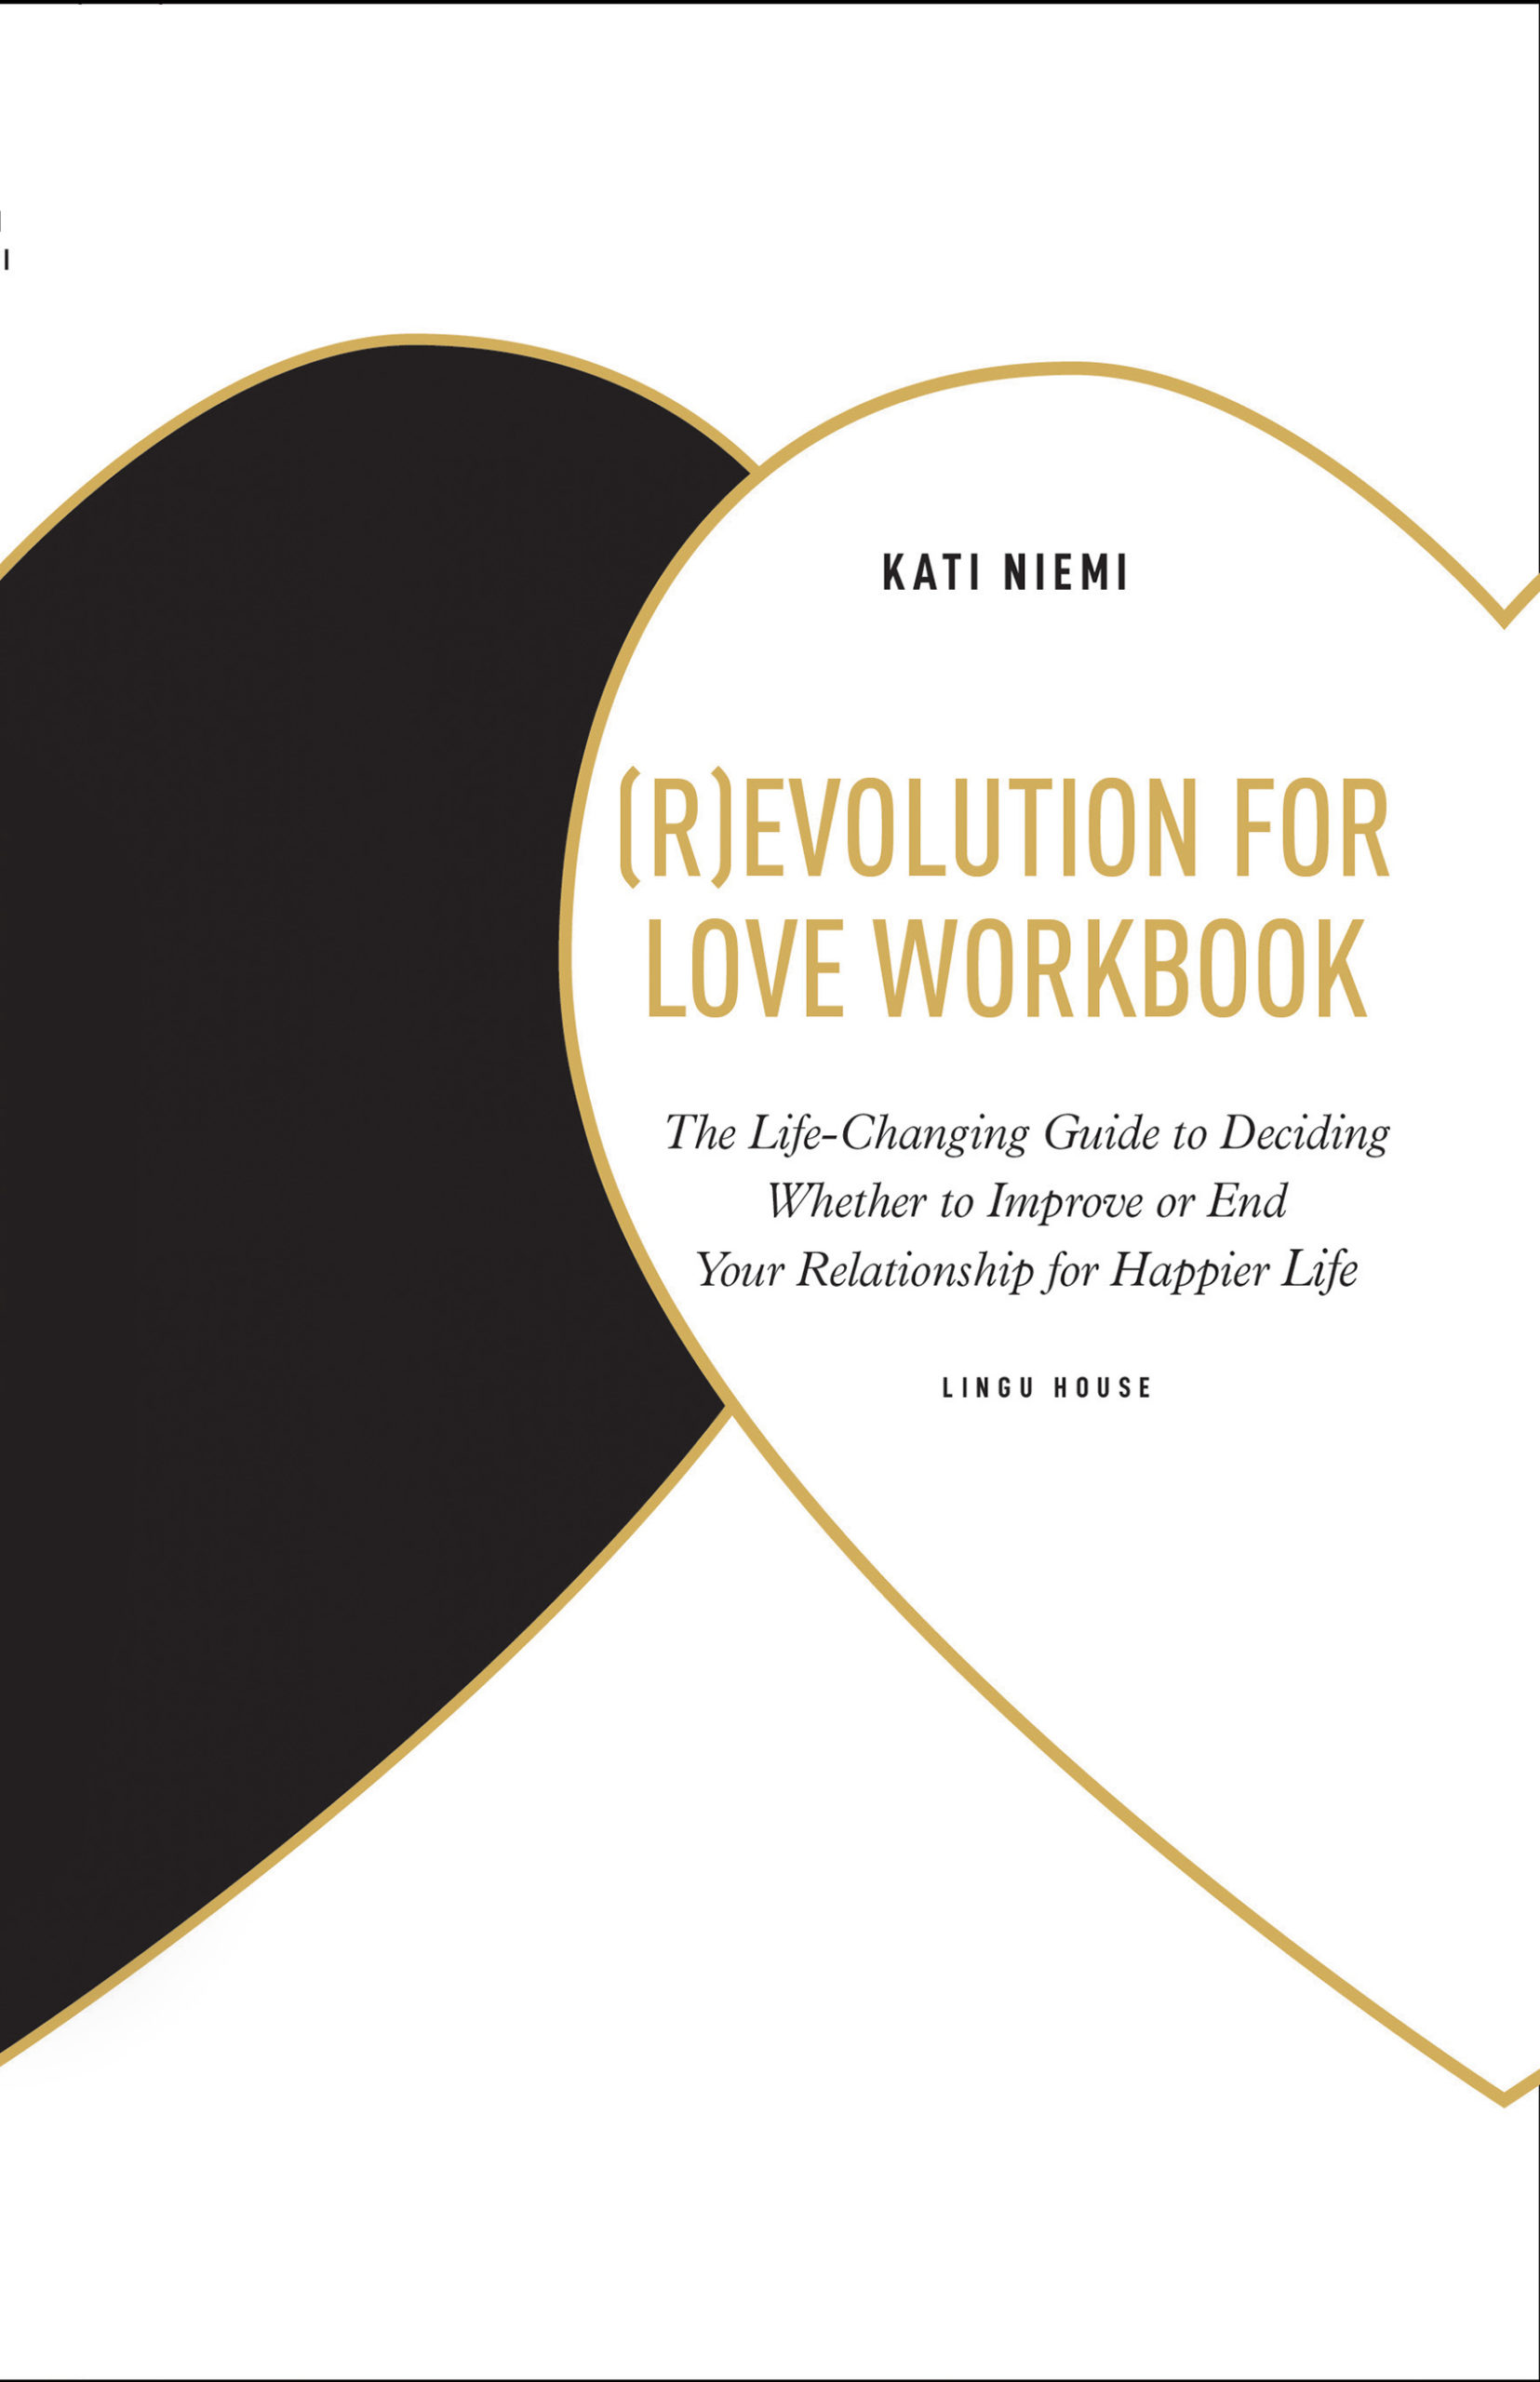 (R)EVOLUTION FOR LOVE WORKBOOK - The Life-Changing Guide to Deciding Whether to Improve or End Your Relationship for Happier Life (English Book)